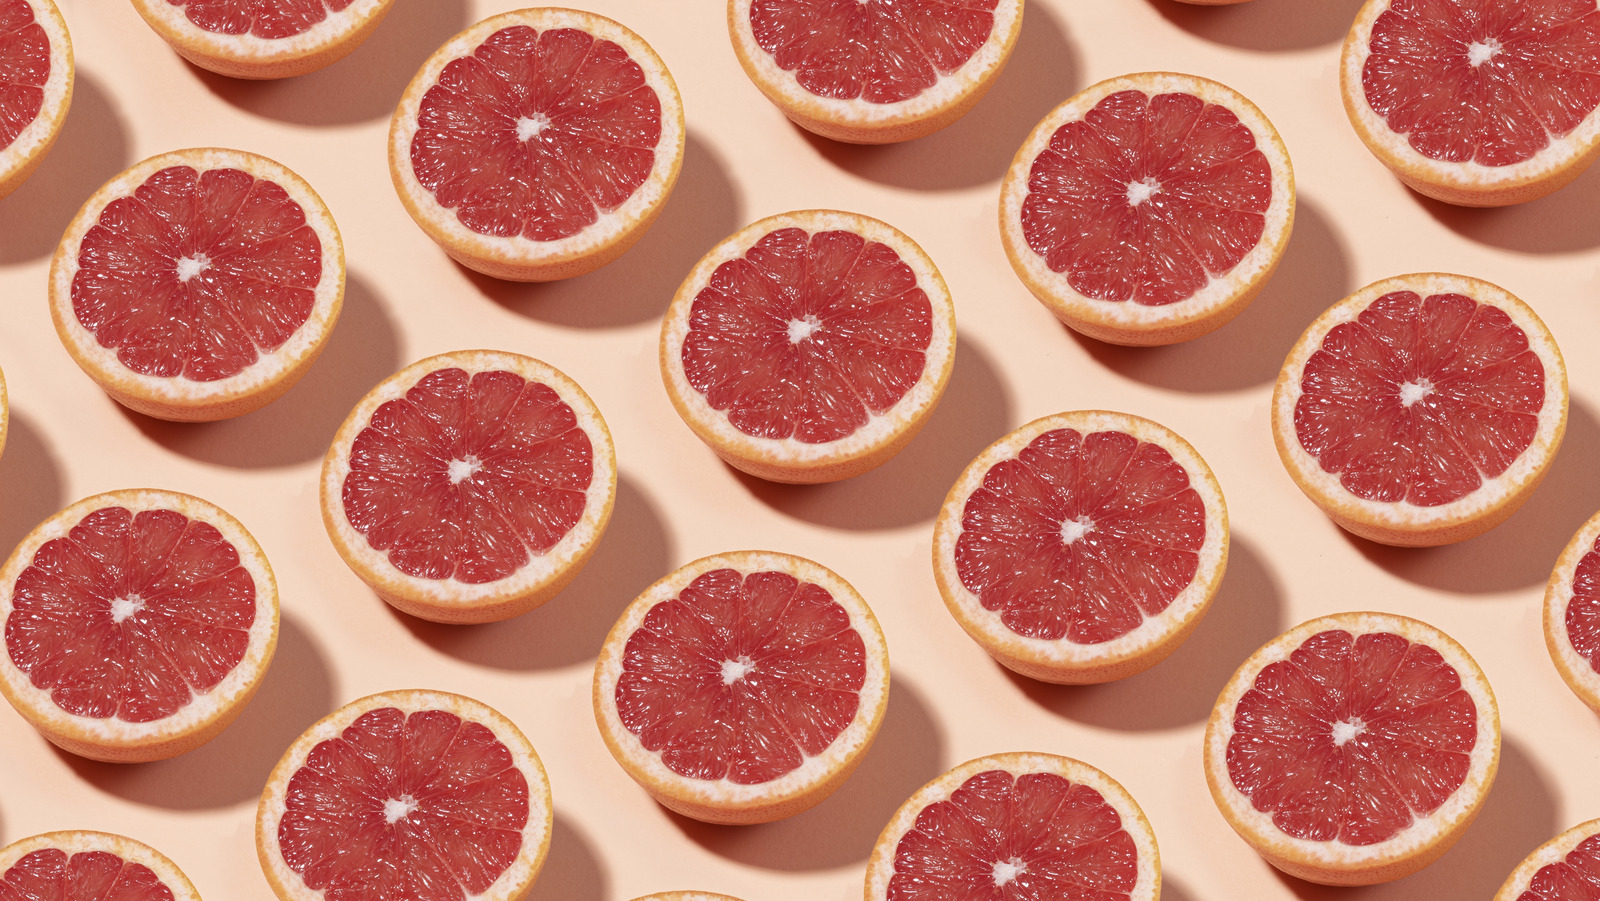 https://www.tastingtable.com/img/gallery/how-a-grapefruit-knife-allows-you-to-cut-perfect-sections-every-time/l-intro-1693242044.jpg